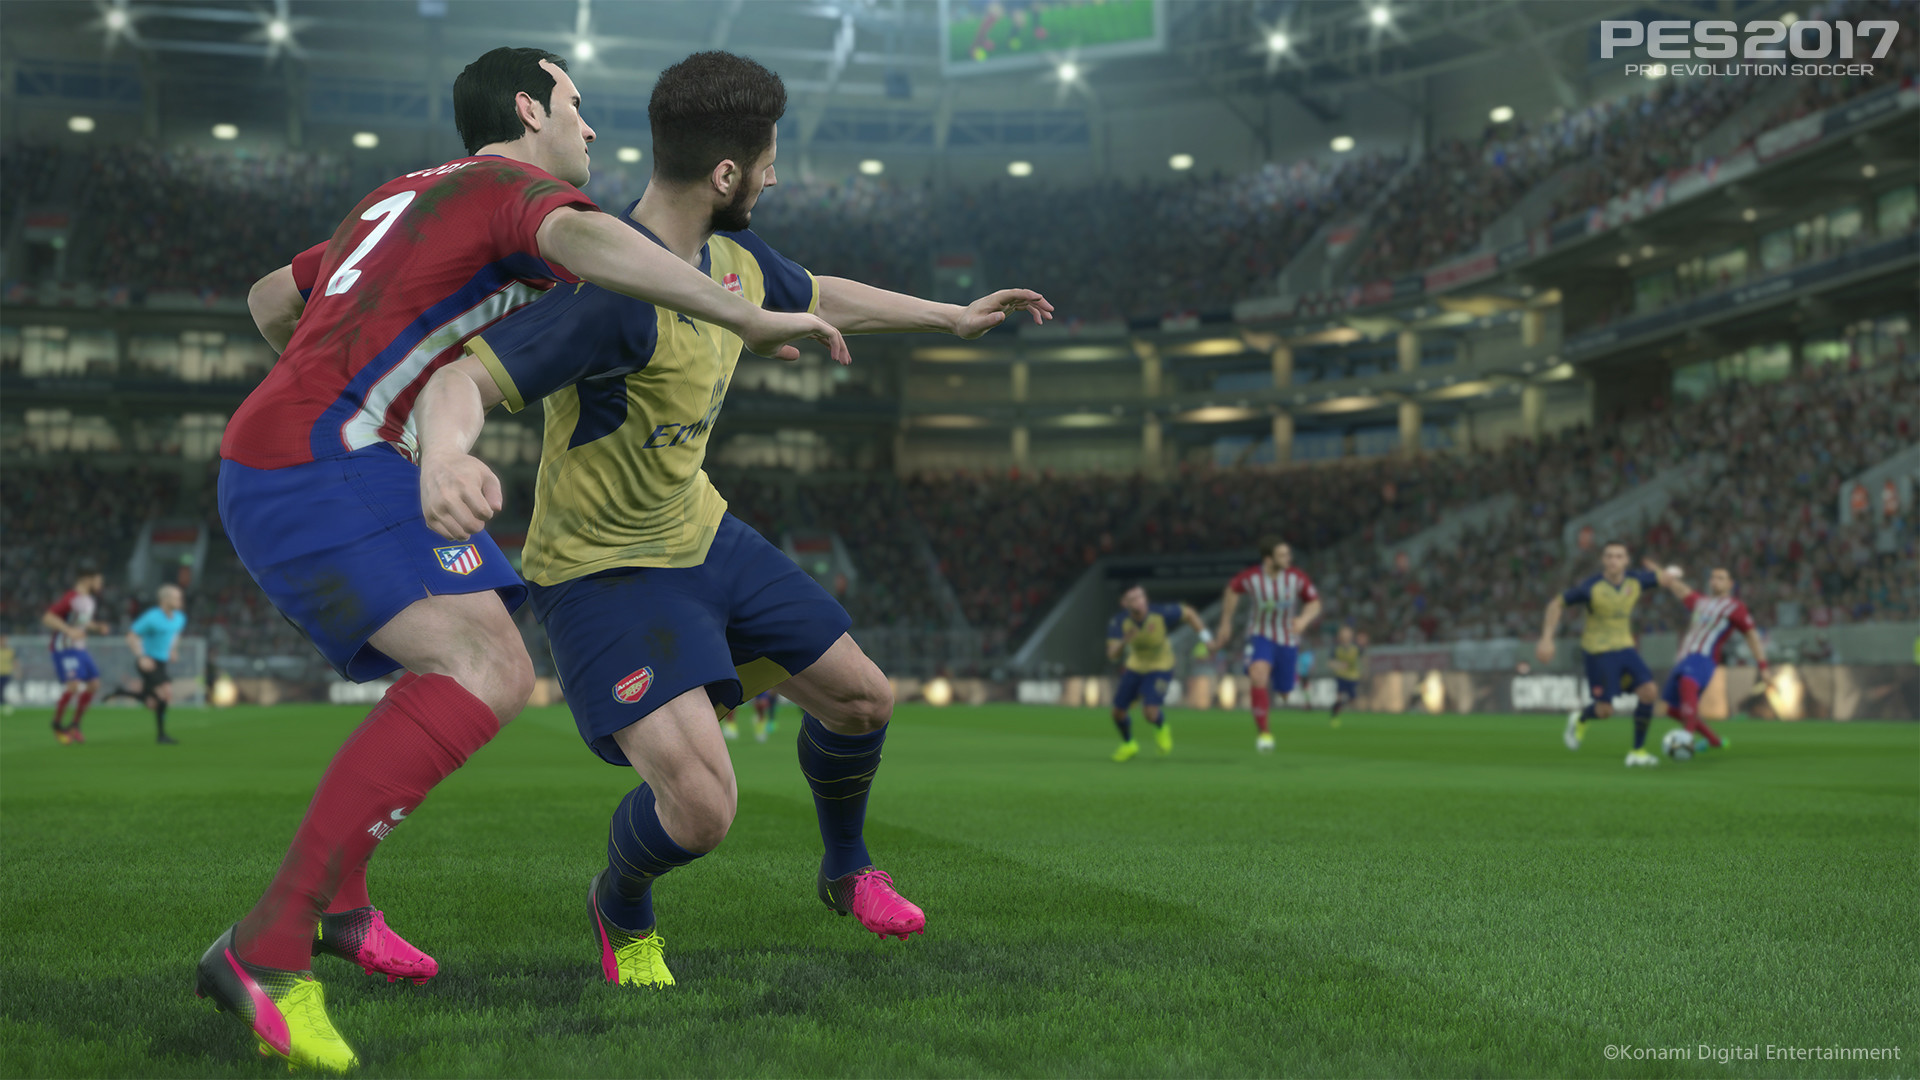 Pro Soccer 2017 review: The finest game ever made | Ars